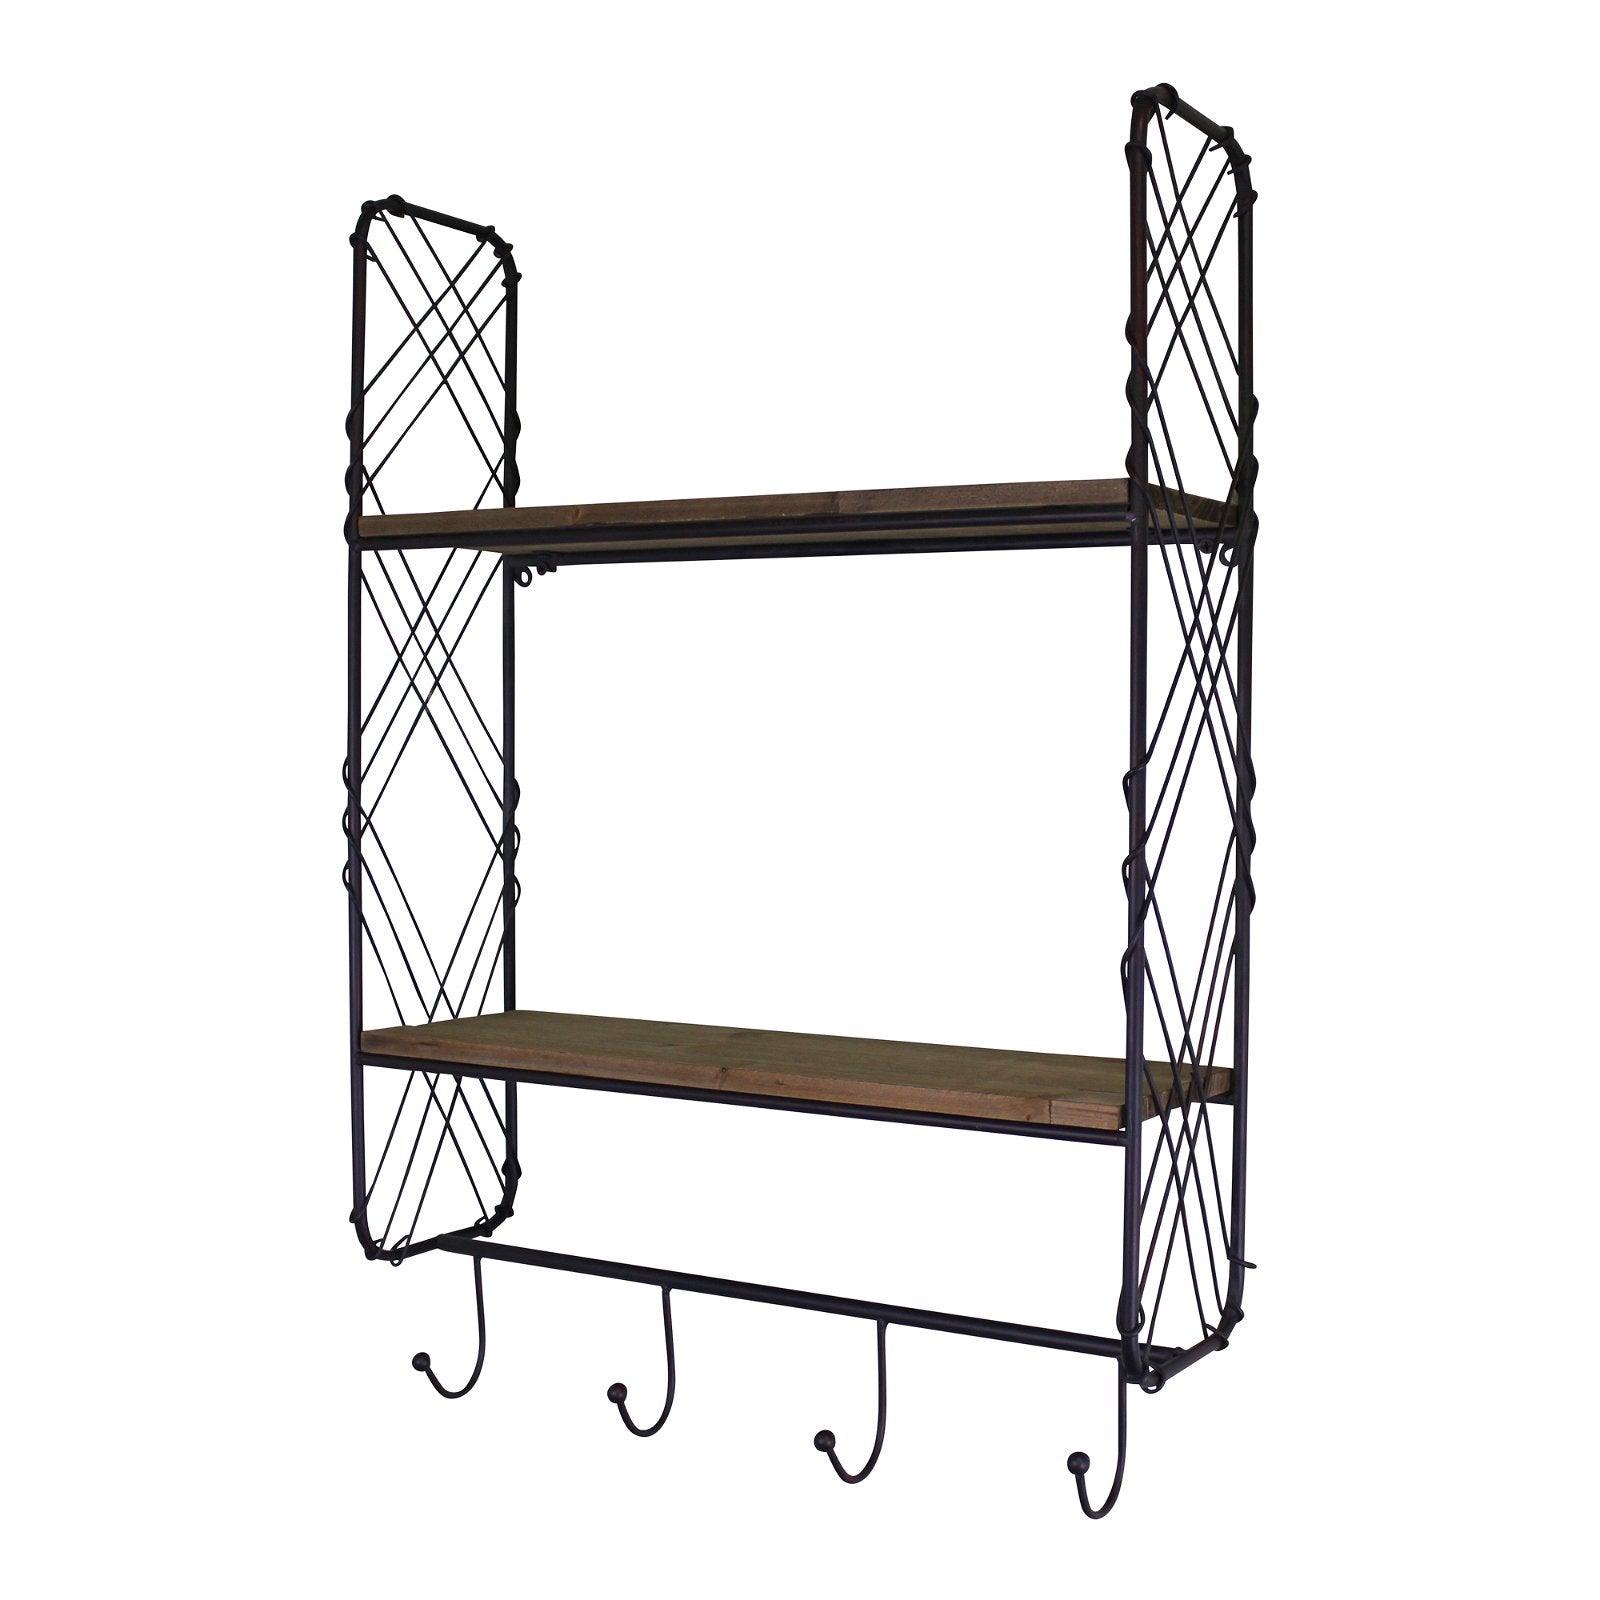 View Industrial Style Wall Shelving Unit With Coat Hooks information